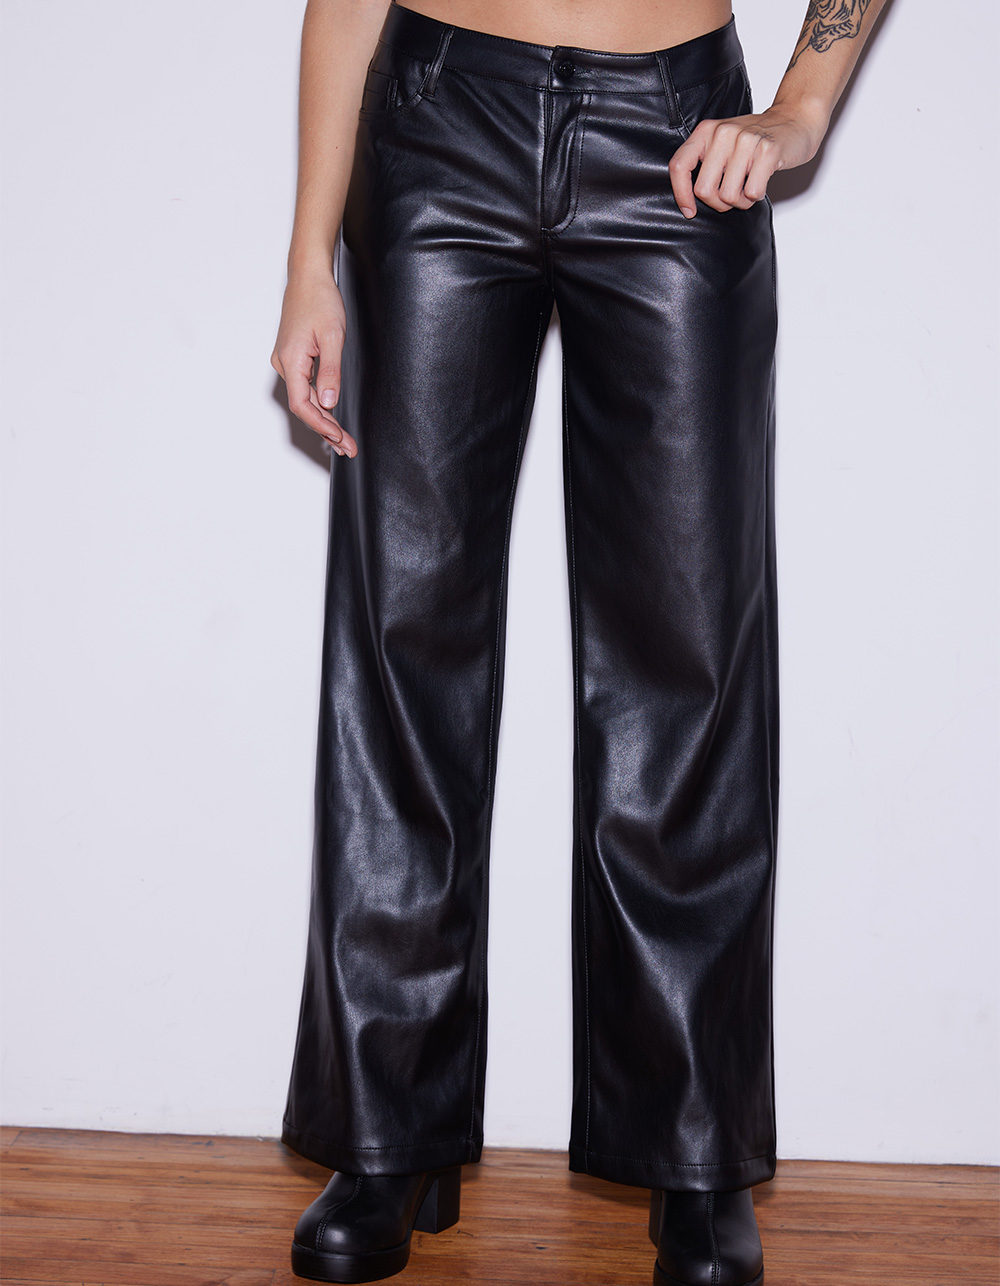 WEST OF MELROSE Faux Leather Low Rise Wide Leg Womens Pants - BLACK